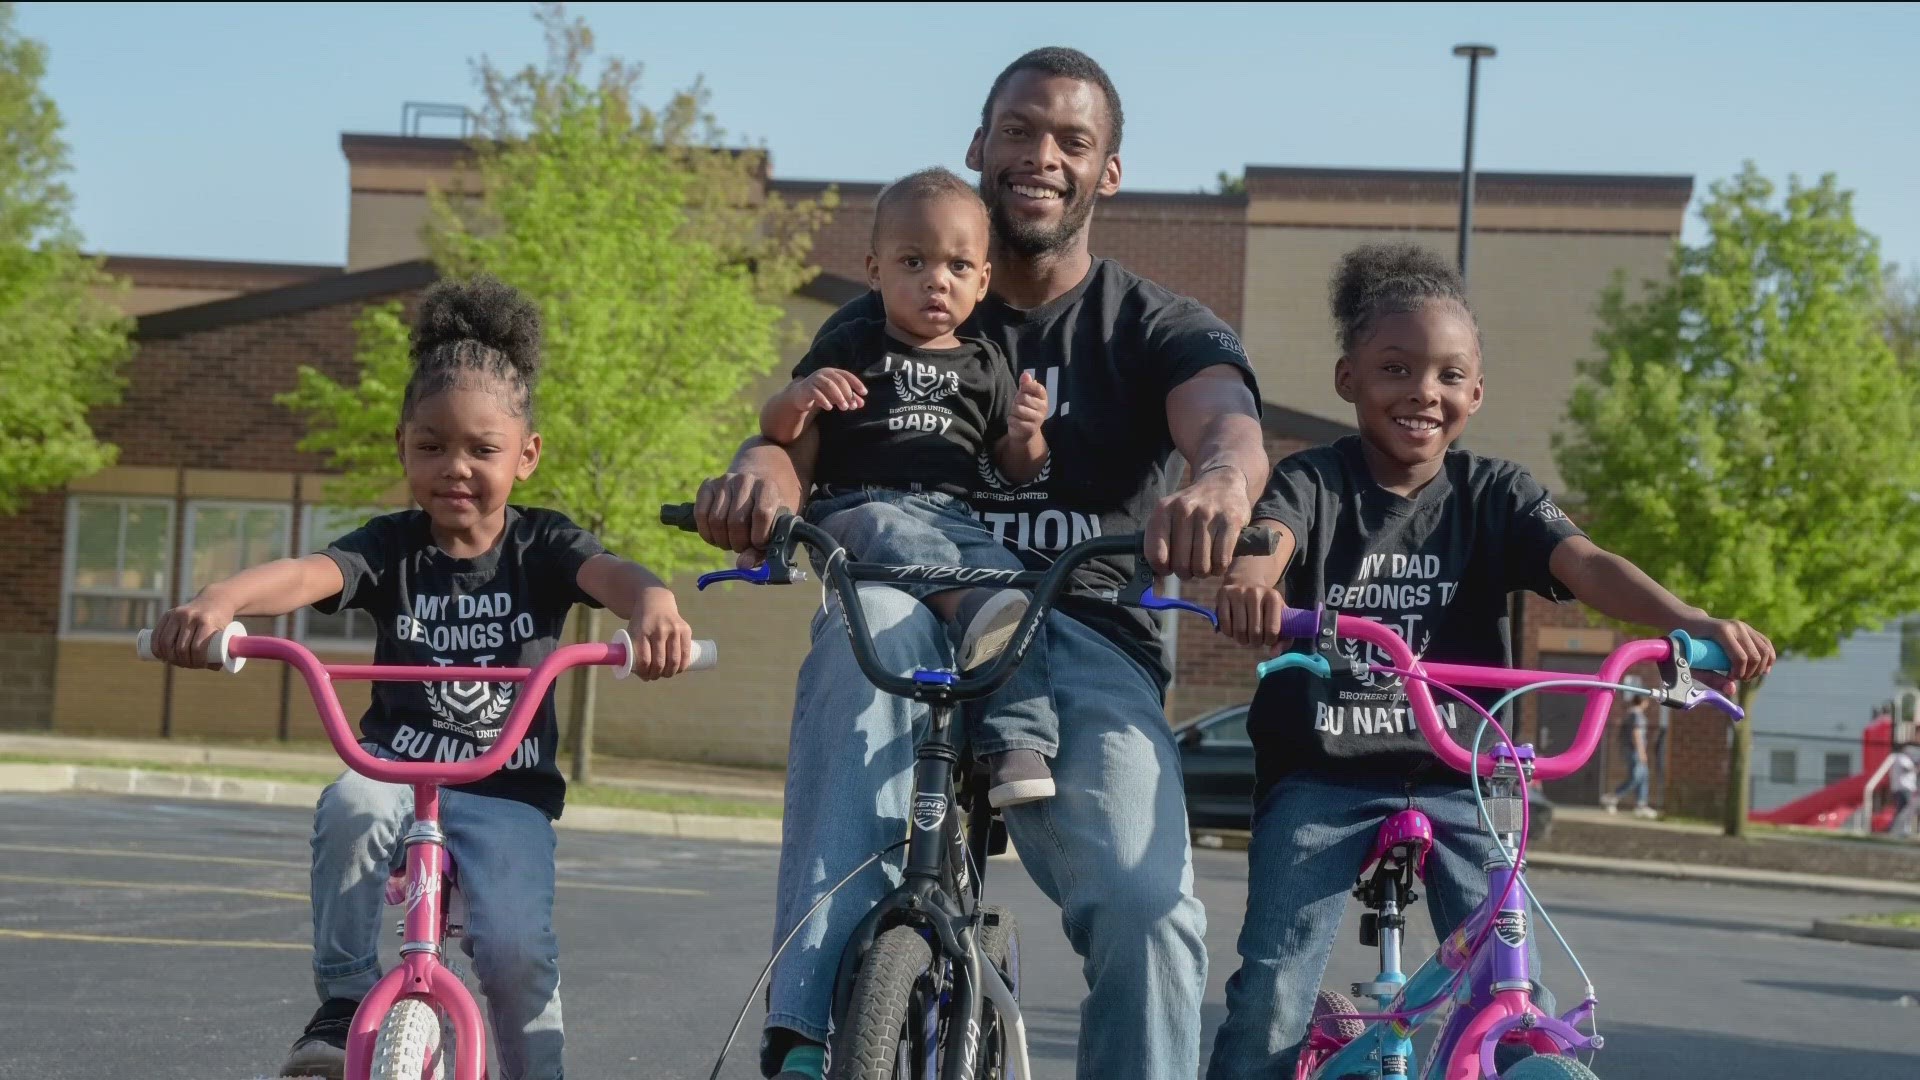 Pathway Toledo created two programs founded on principles of fatherhood, motherhood and the importance of co-parenting: Brothers United and Sisters United.